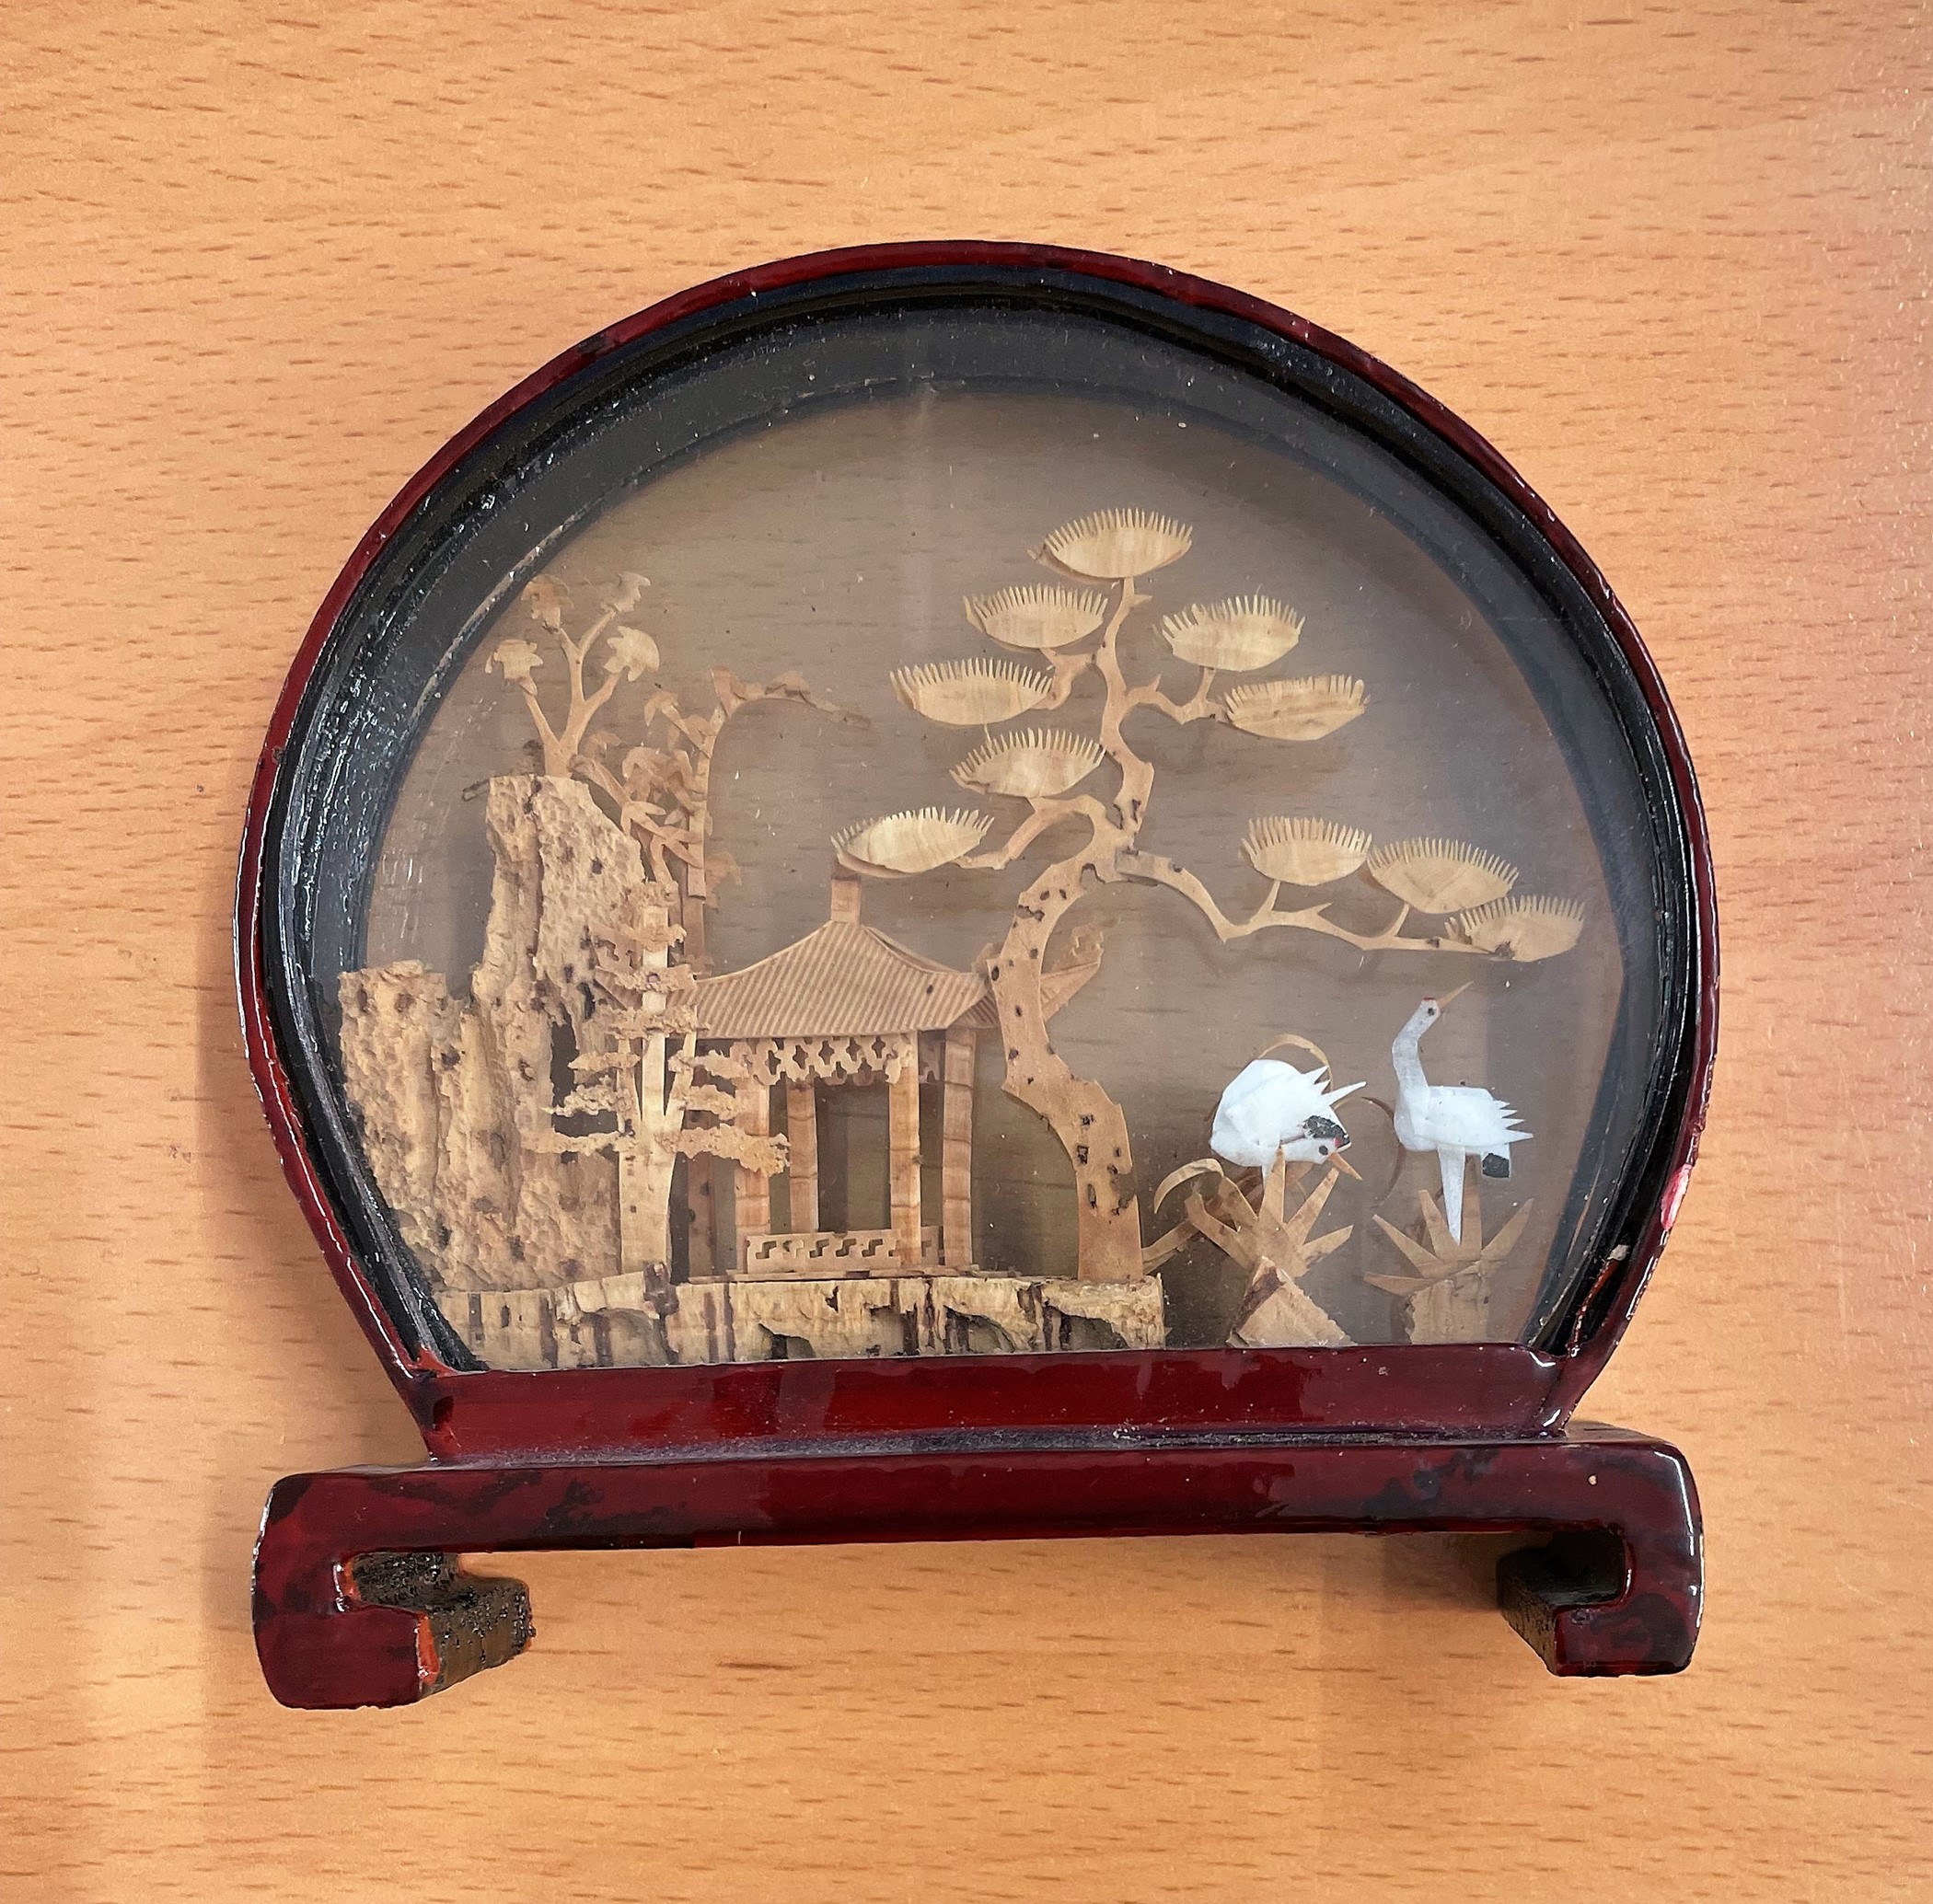 Vintage Chinese Cork Landscape Carving With Cranes and Pagoda. 4inches in height. 4 inches wide. Set